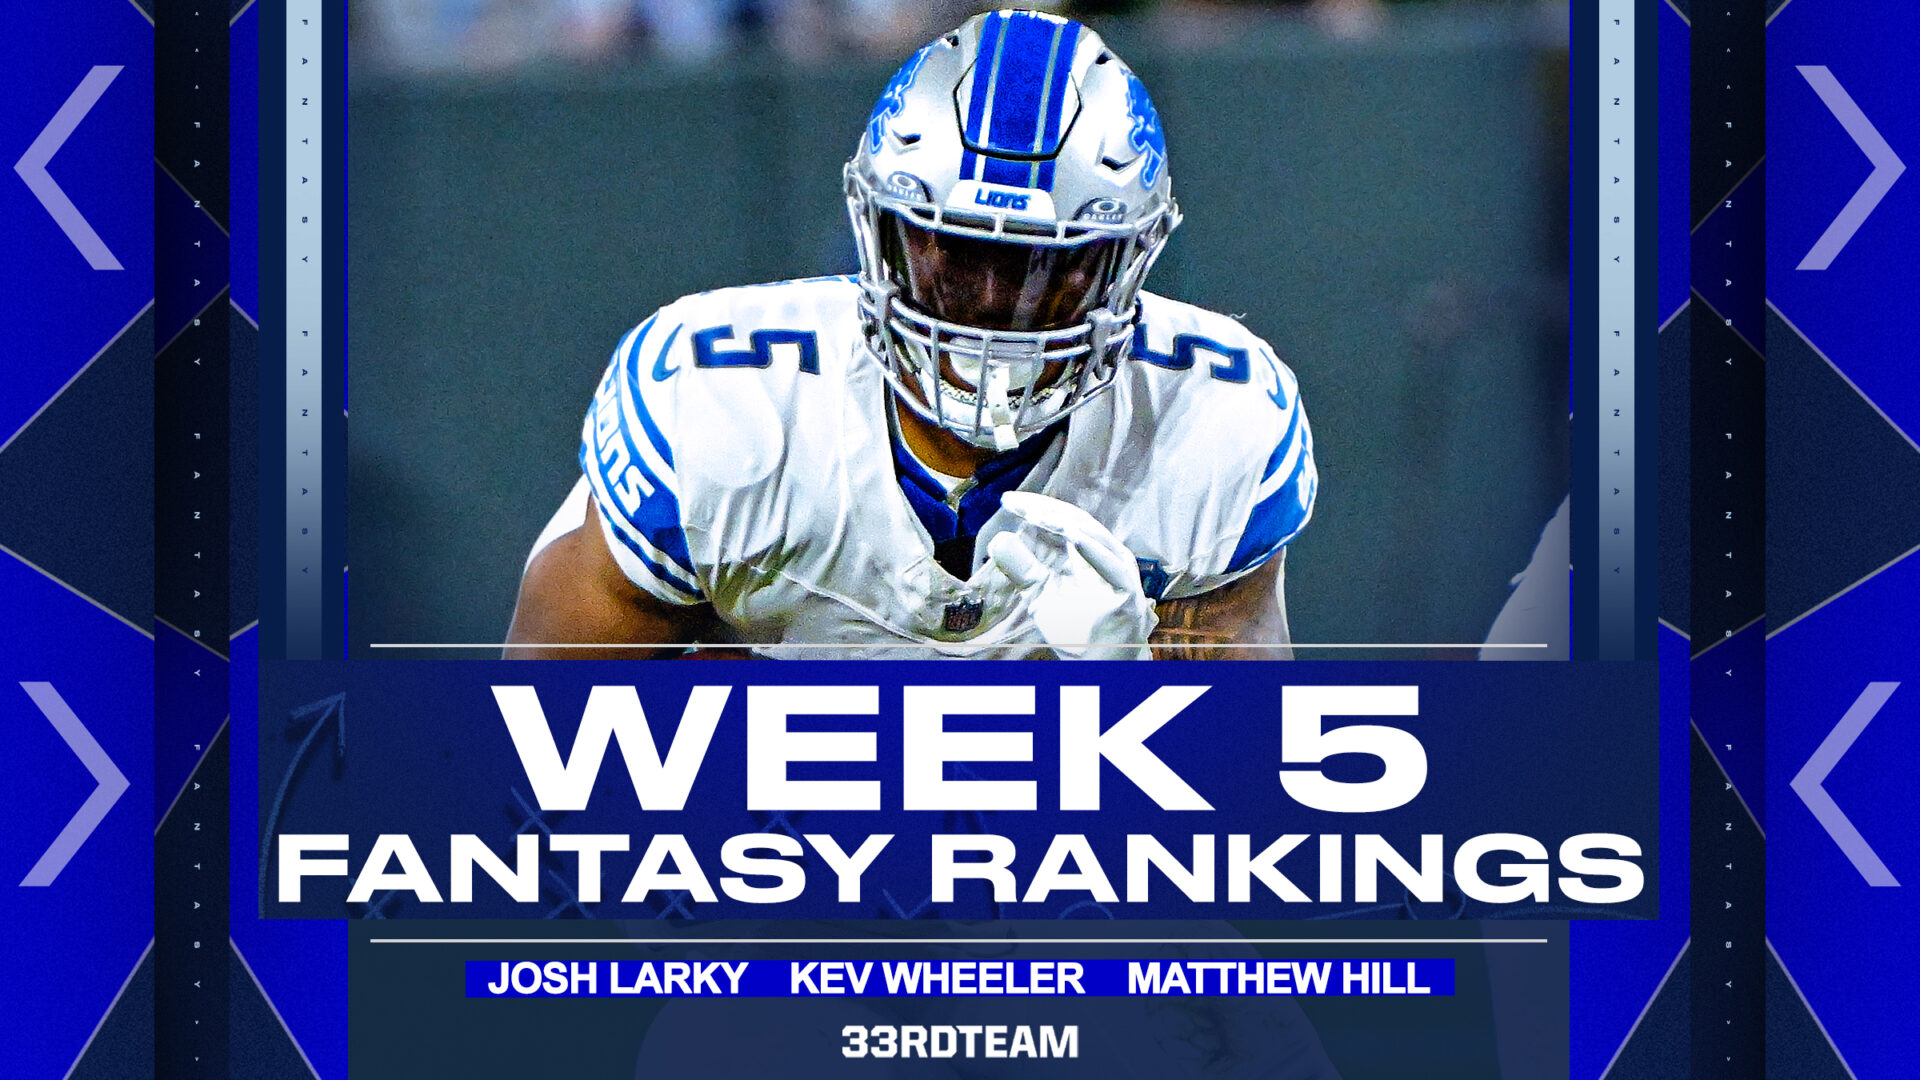 2020 Fantasy Football Rankings: Most Accurate Experts